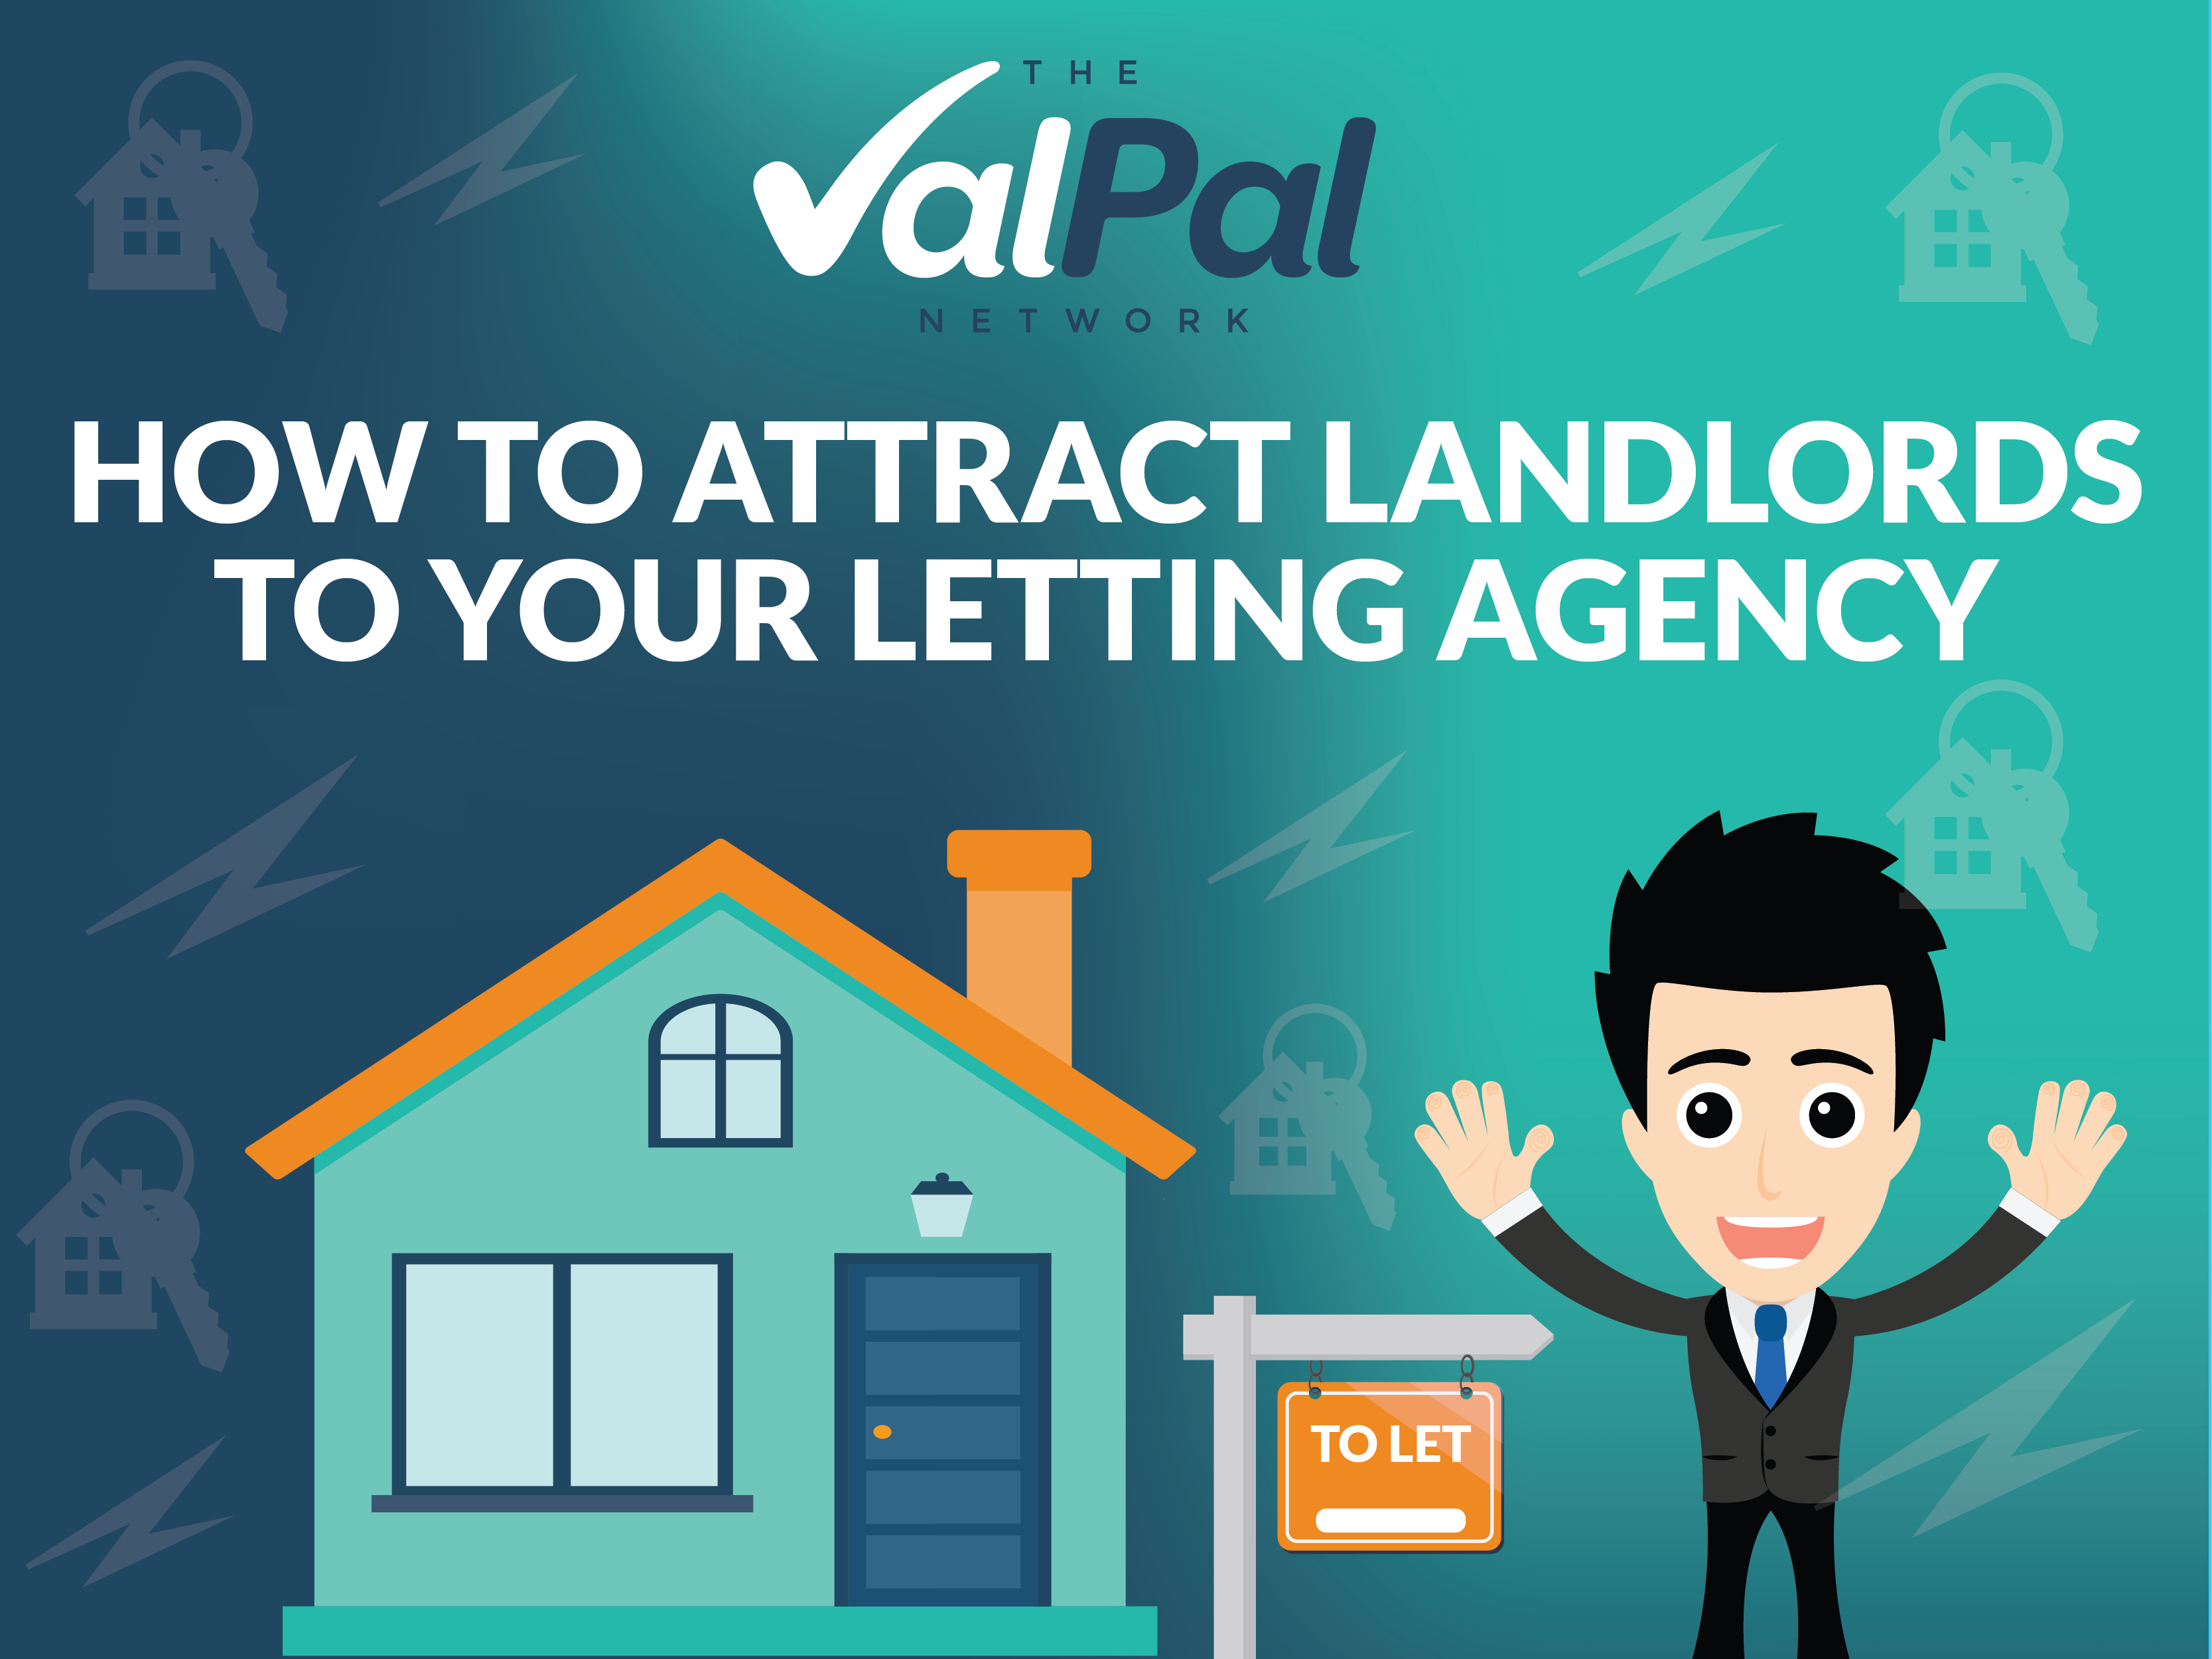 How to attract landlords to your letting agency